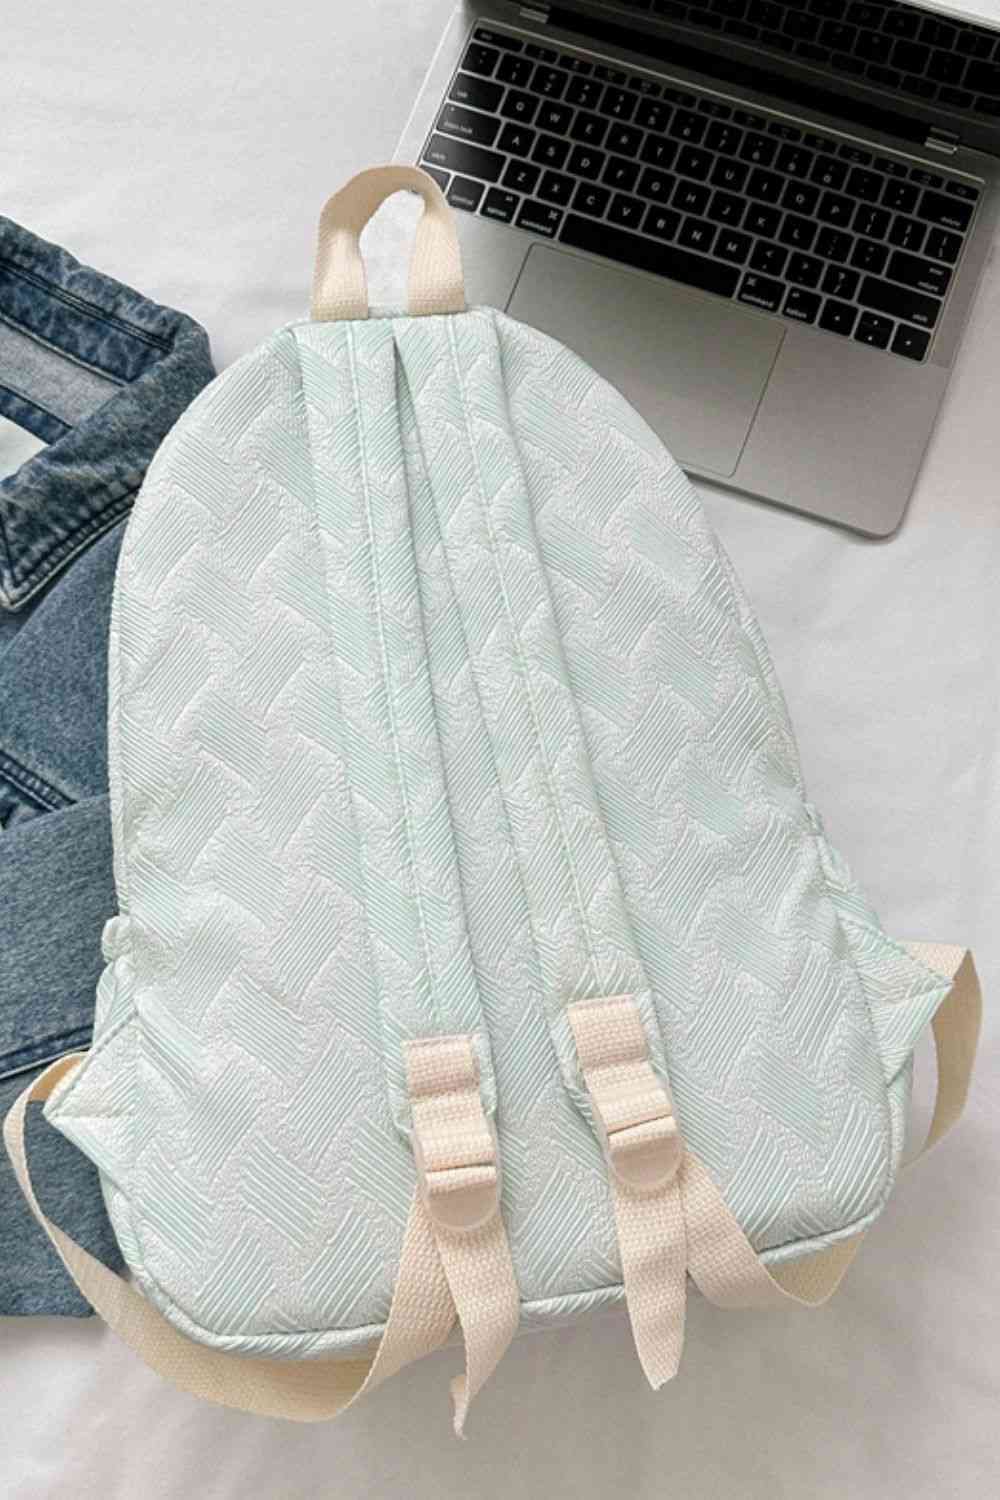 Printed Polyester Large Backpack (Fluffy Ball Included) Trendsi